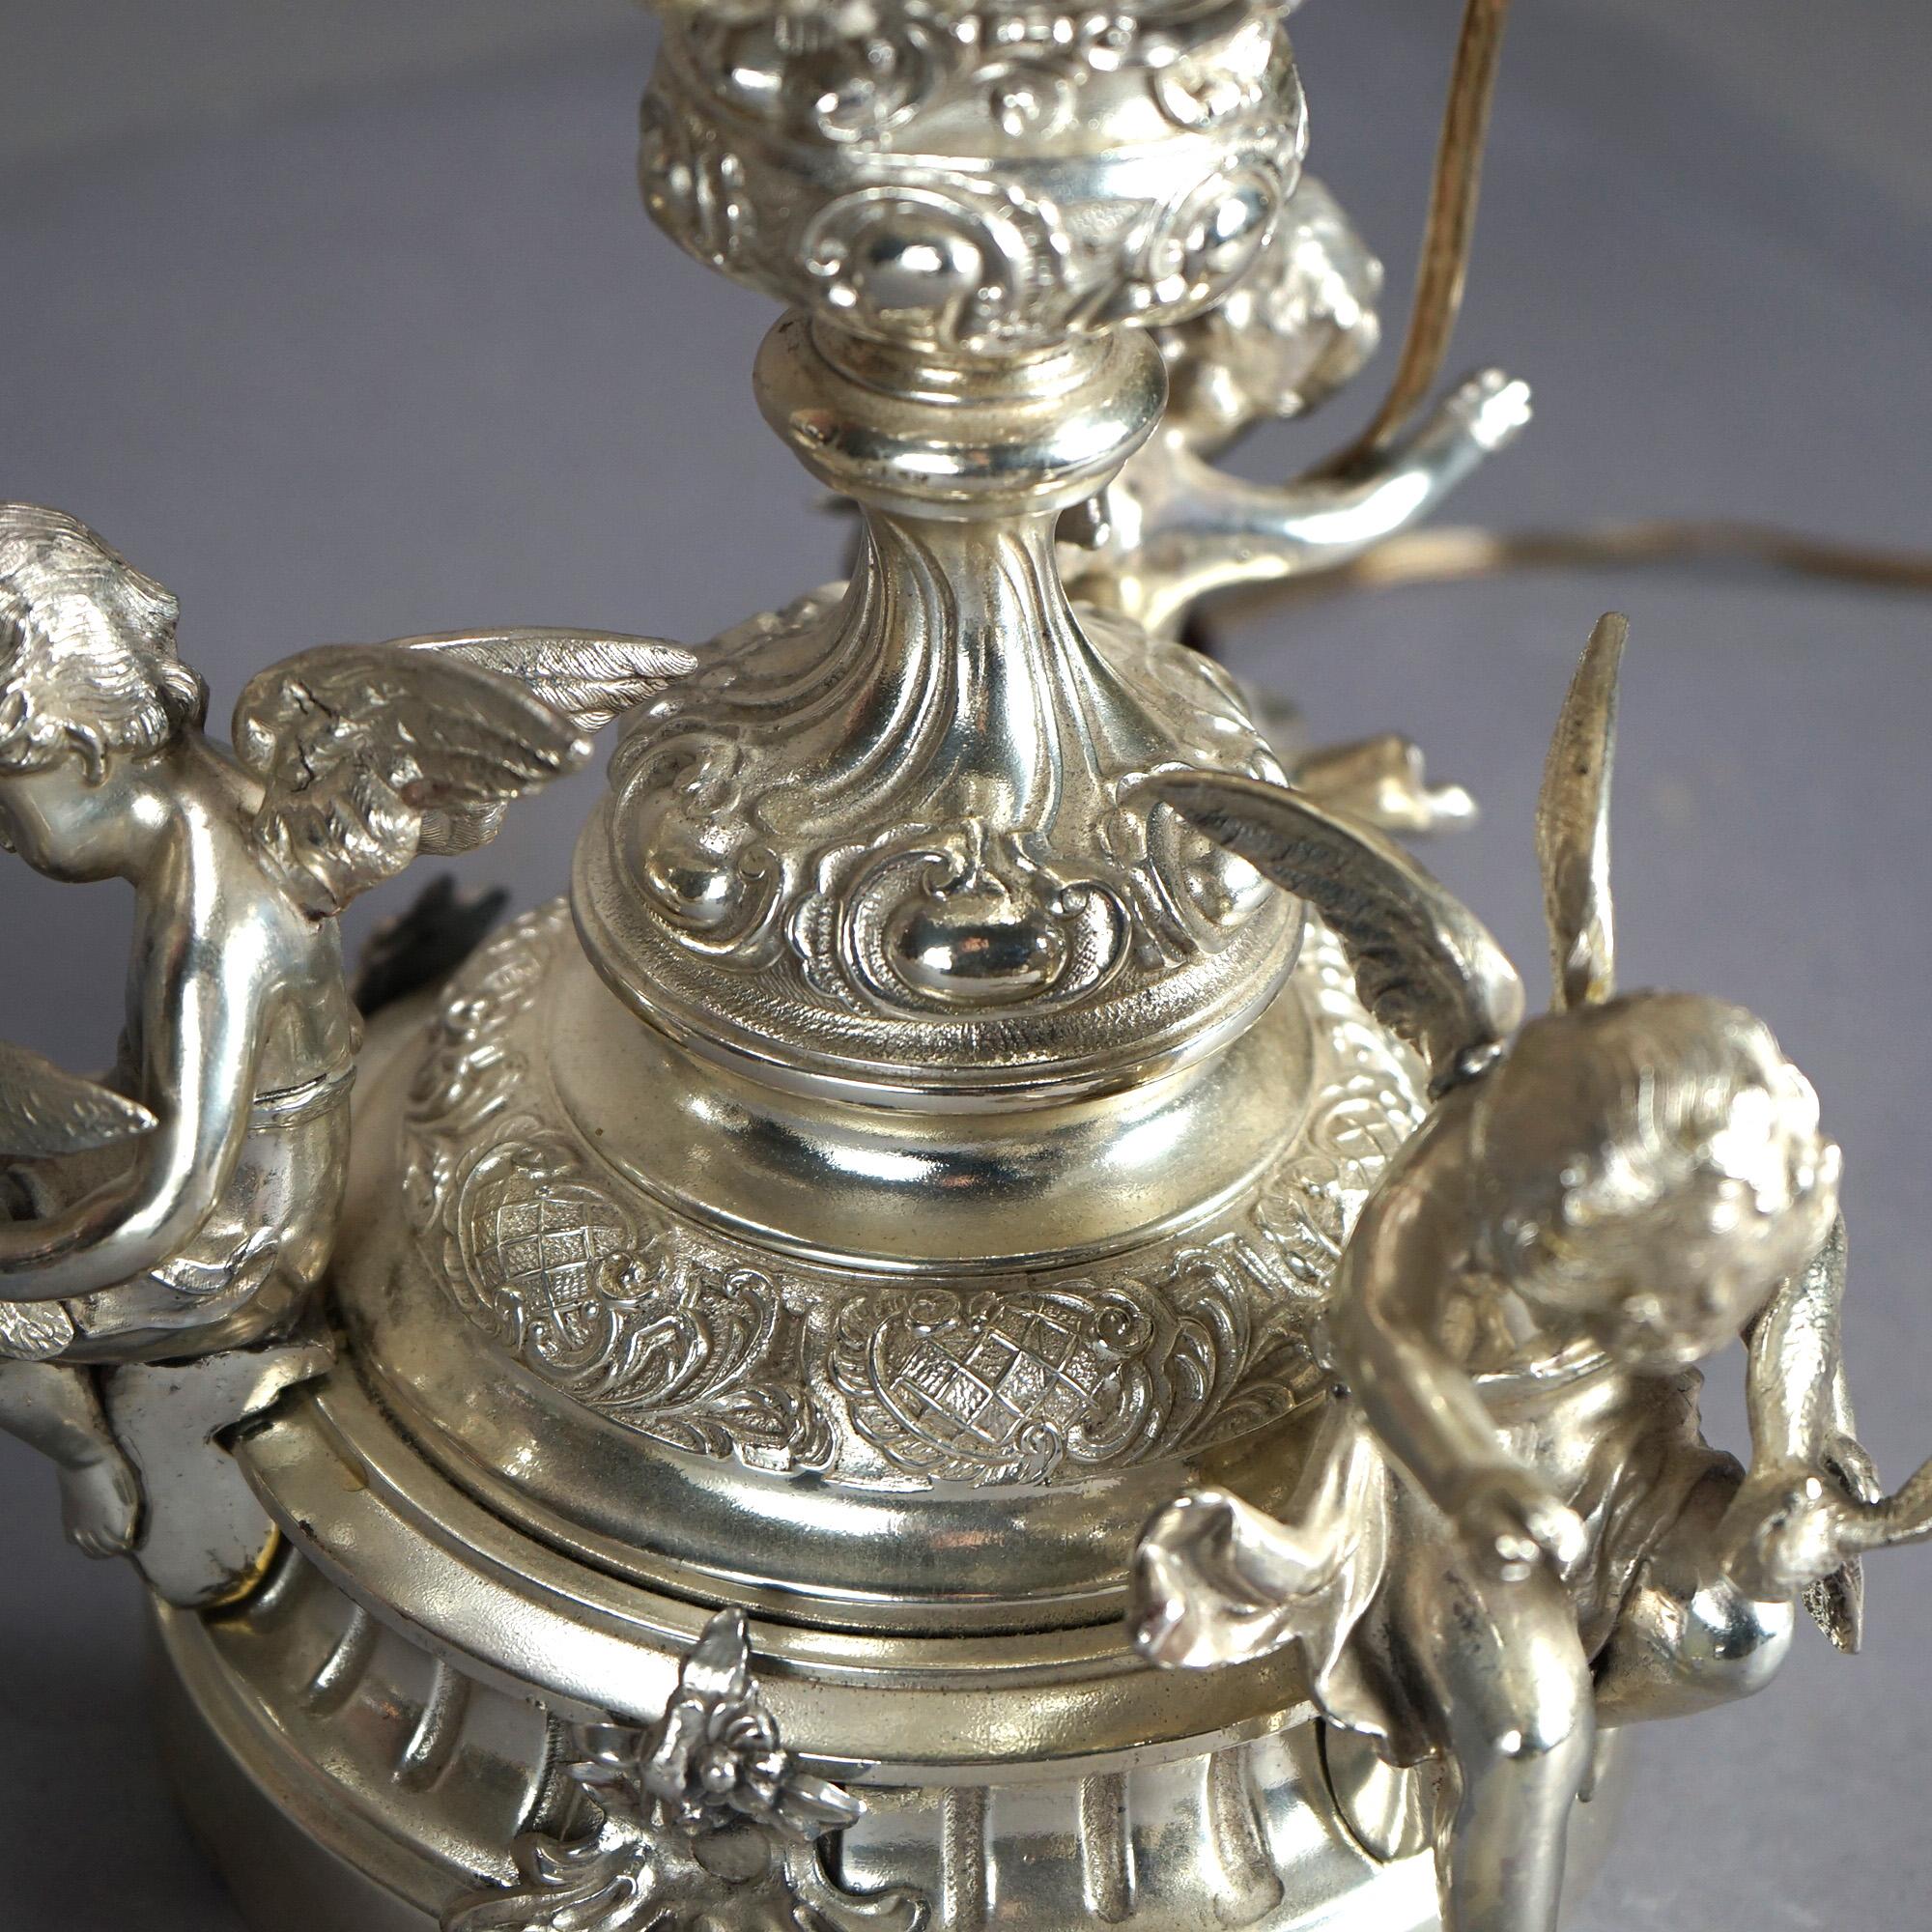 Antique Rococo Figural Silver Plate Parlor Lamp With Winged Cherubs c1890 For Sale 12